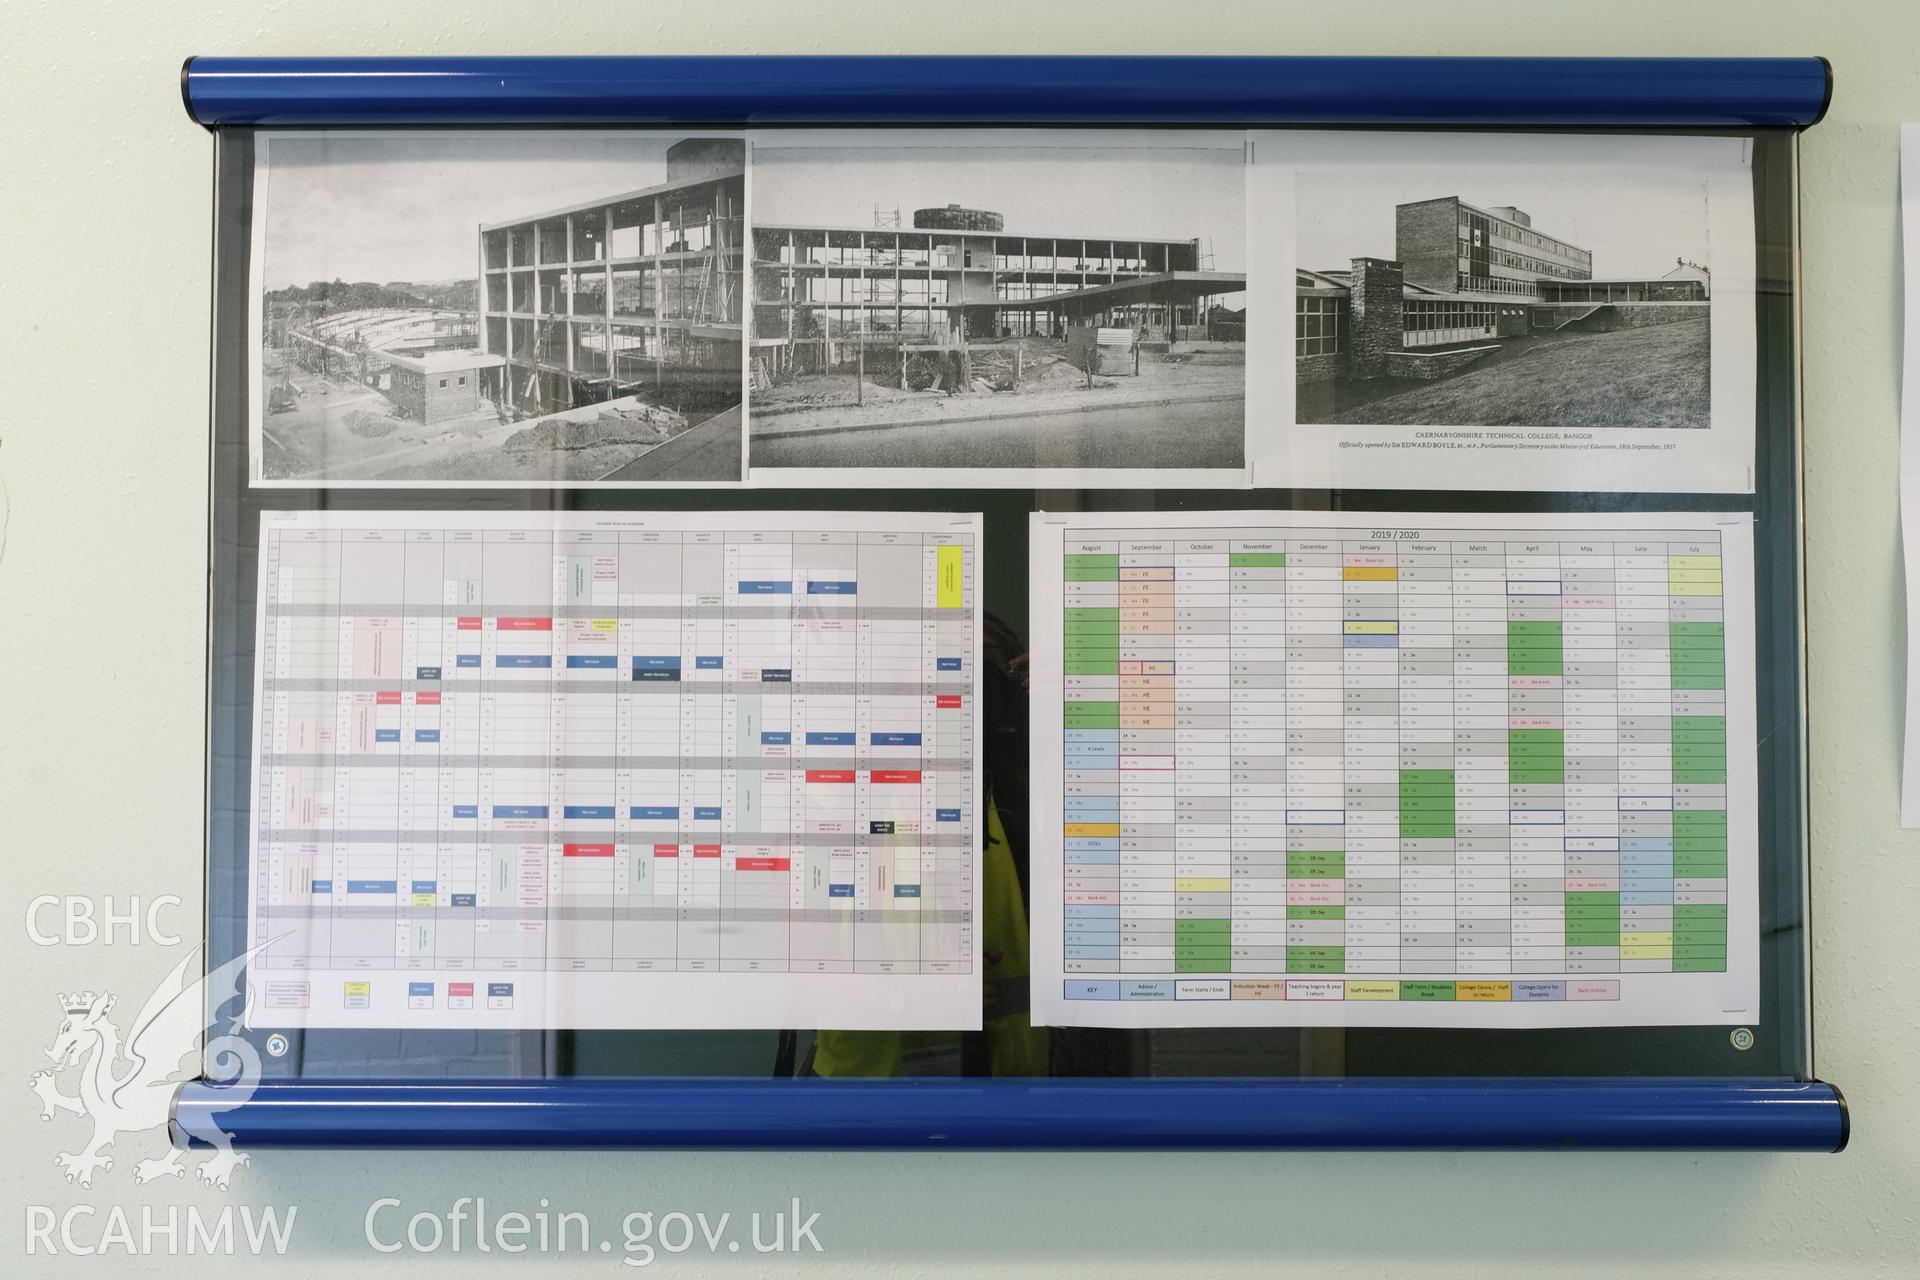 Digital colour photograph showing detailed view of black and white photographs of Caernarfonshire Technical College under construction. Photographed by Dilys Morgan and donated by Wyn Thomas of Grwp Llandrillo-Menai Further Education College, 2019.